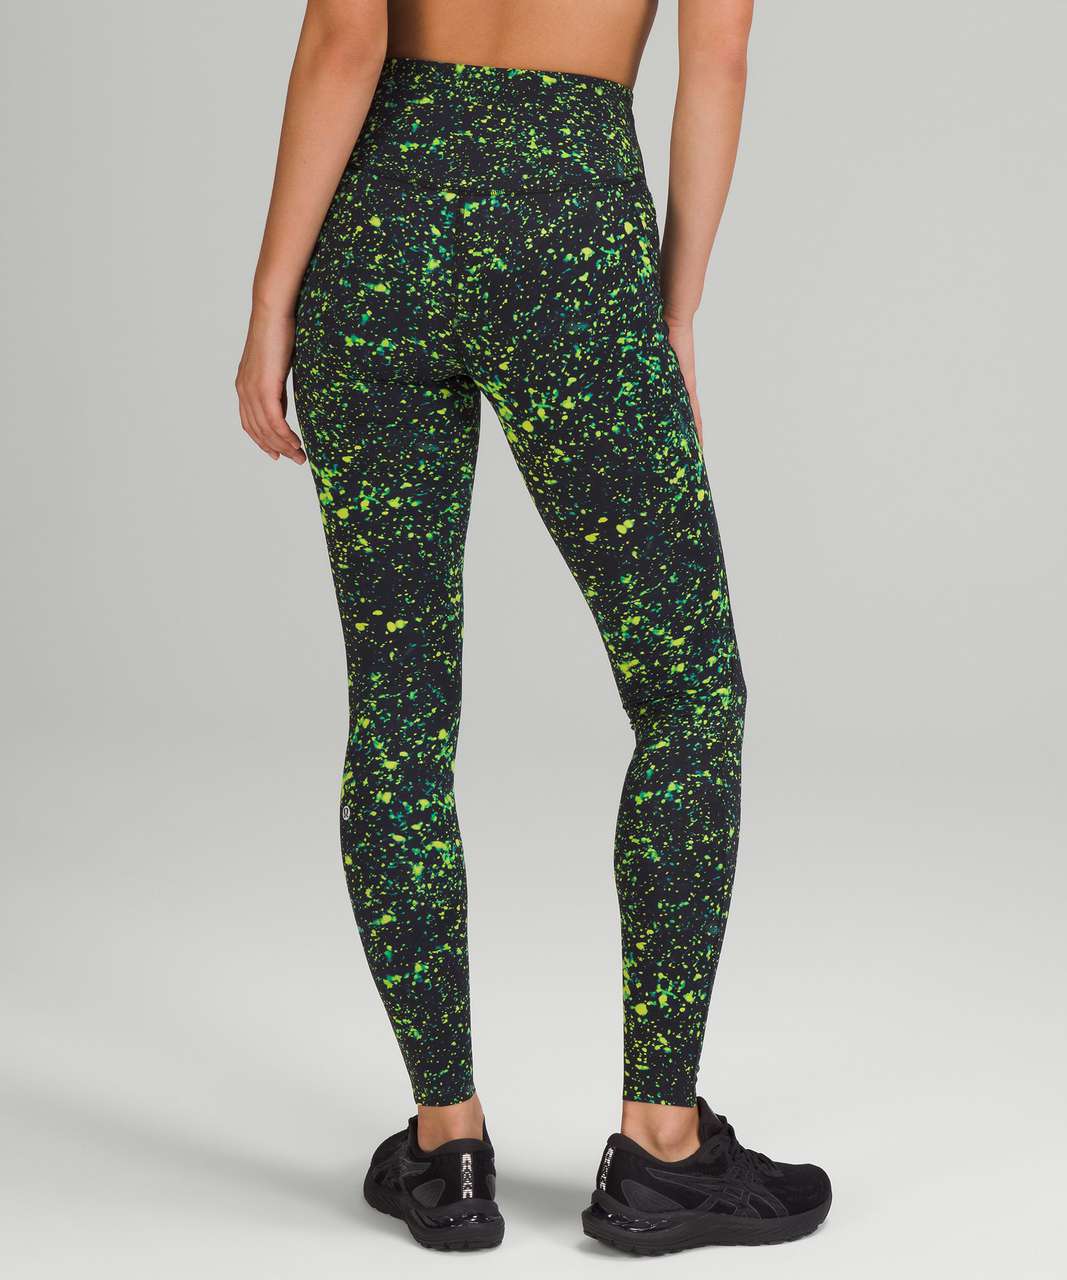 Lululemon Base Pace High-Rise Running Tight 28" - Sparks Fly Multi